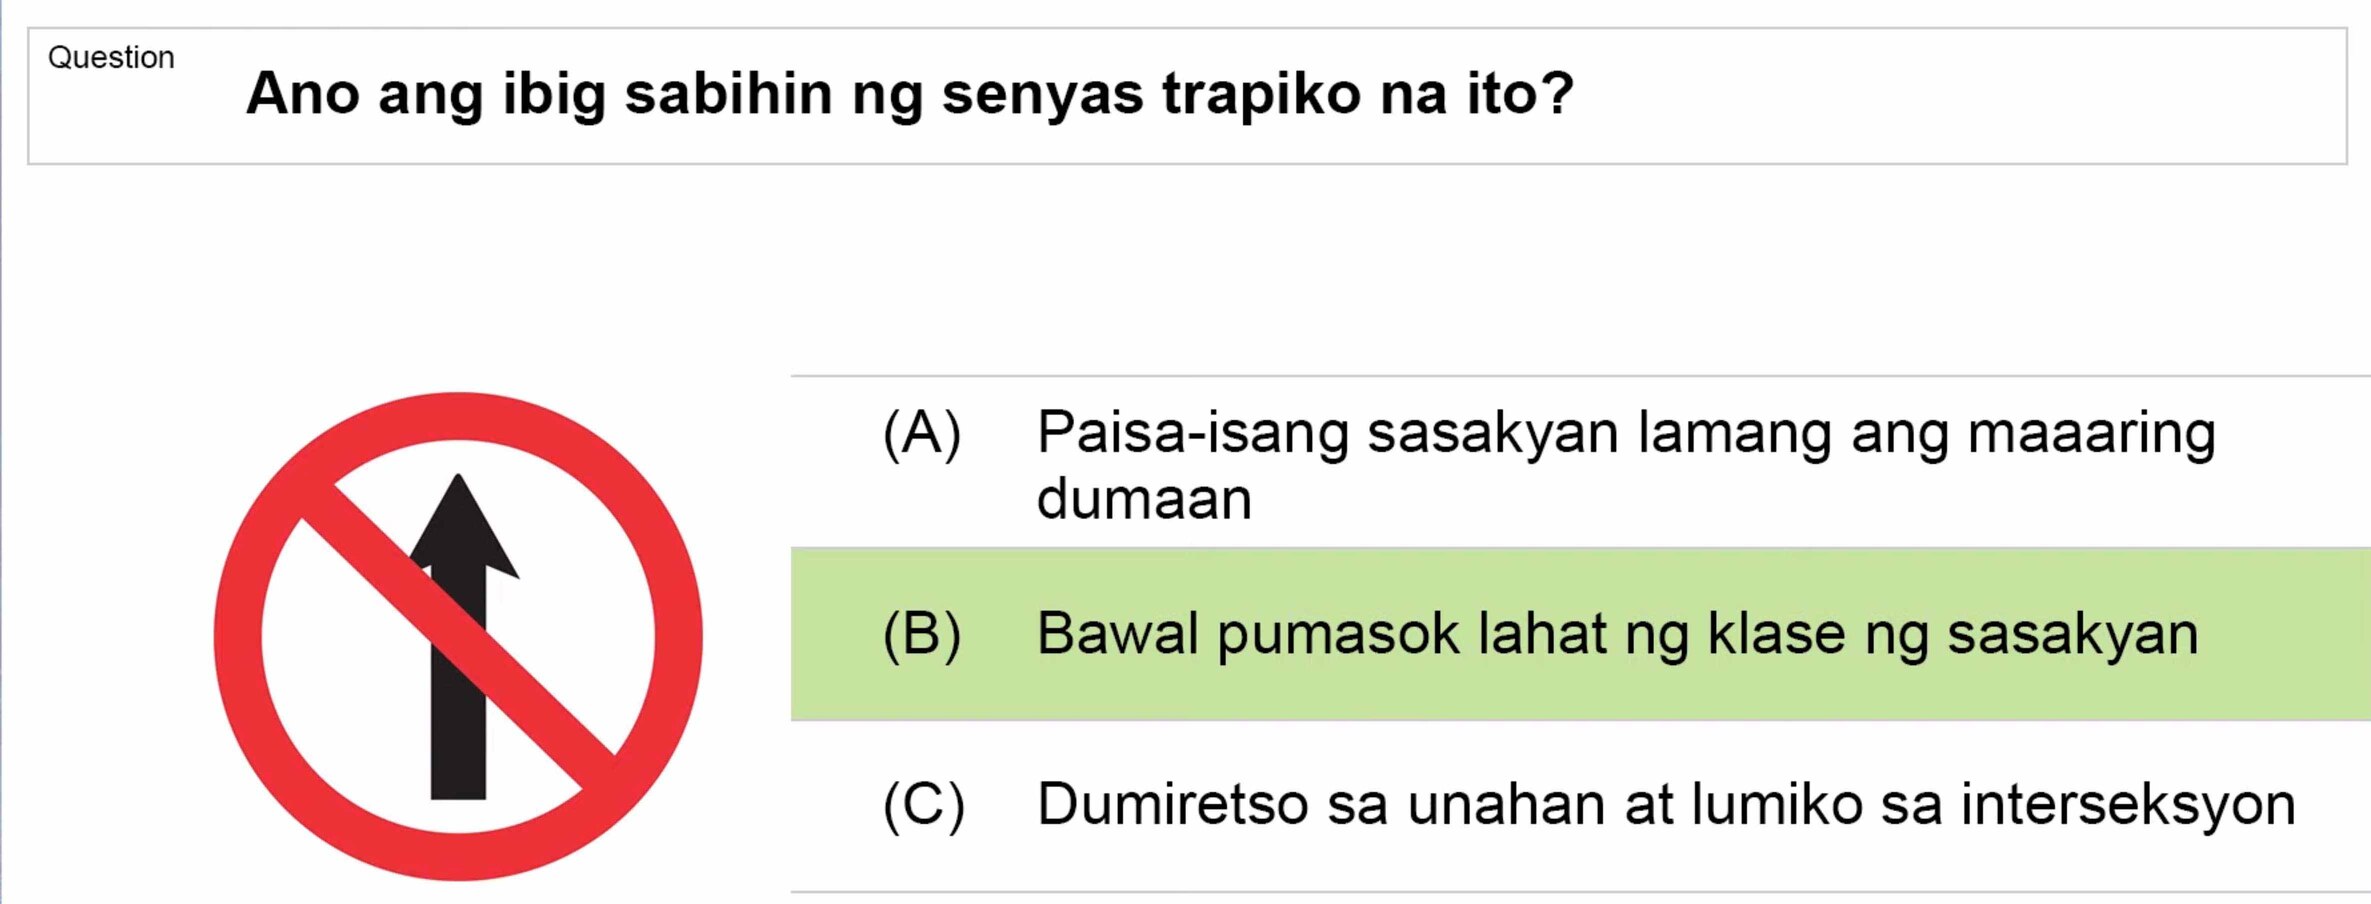 LTO Tagalog non professional exam reviewer light vehicle 3 (43)